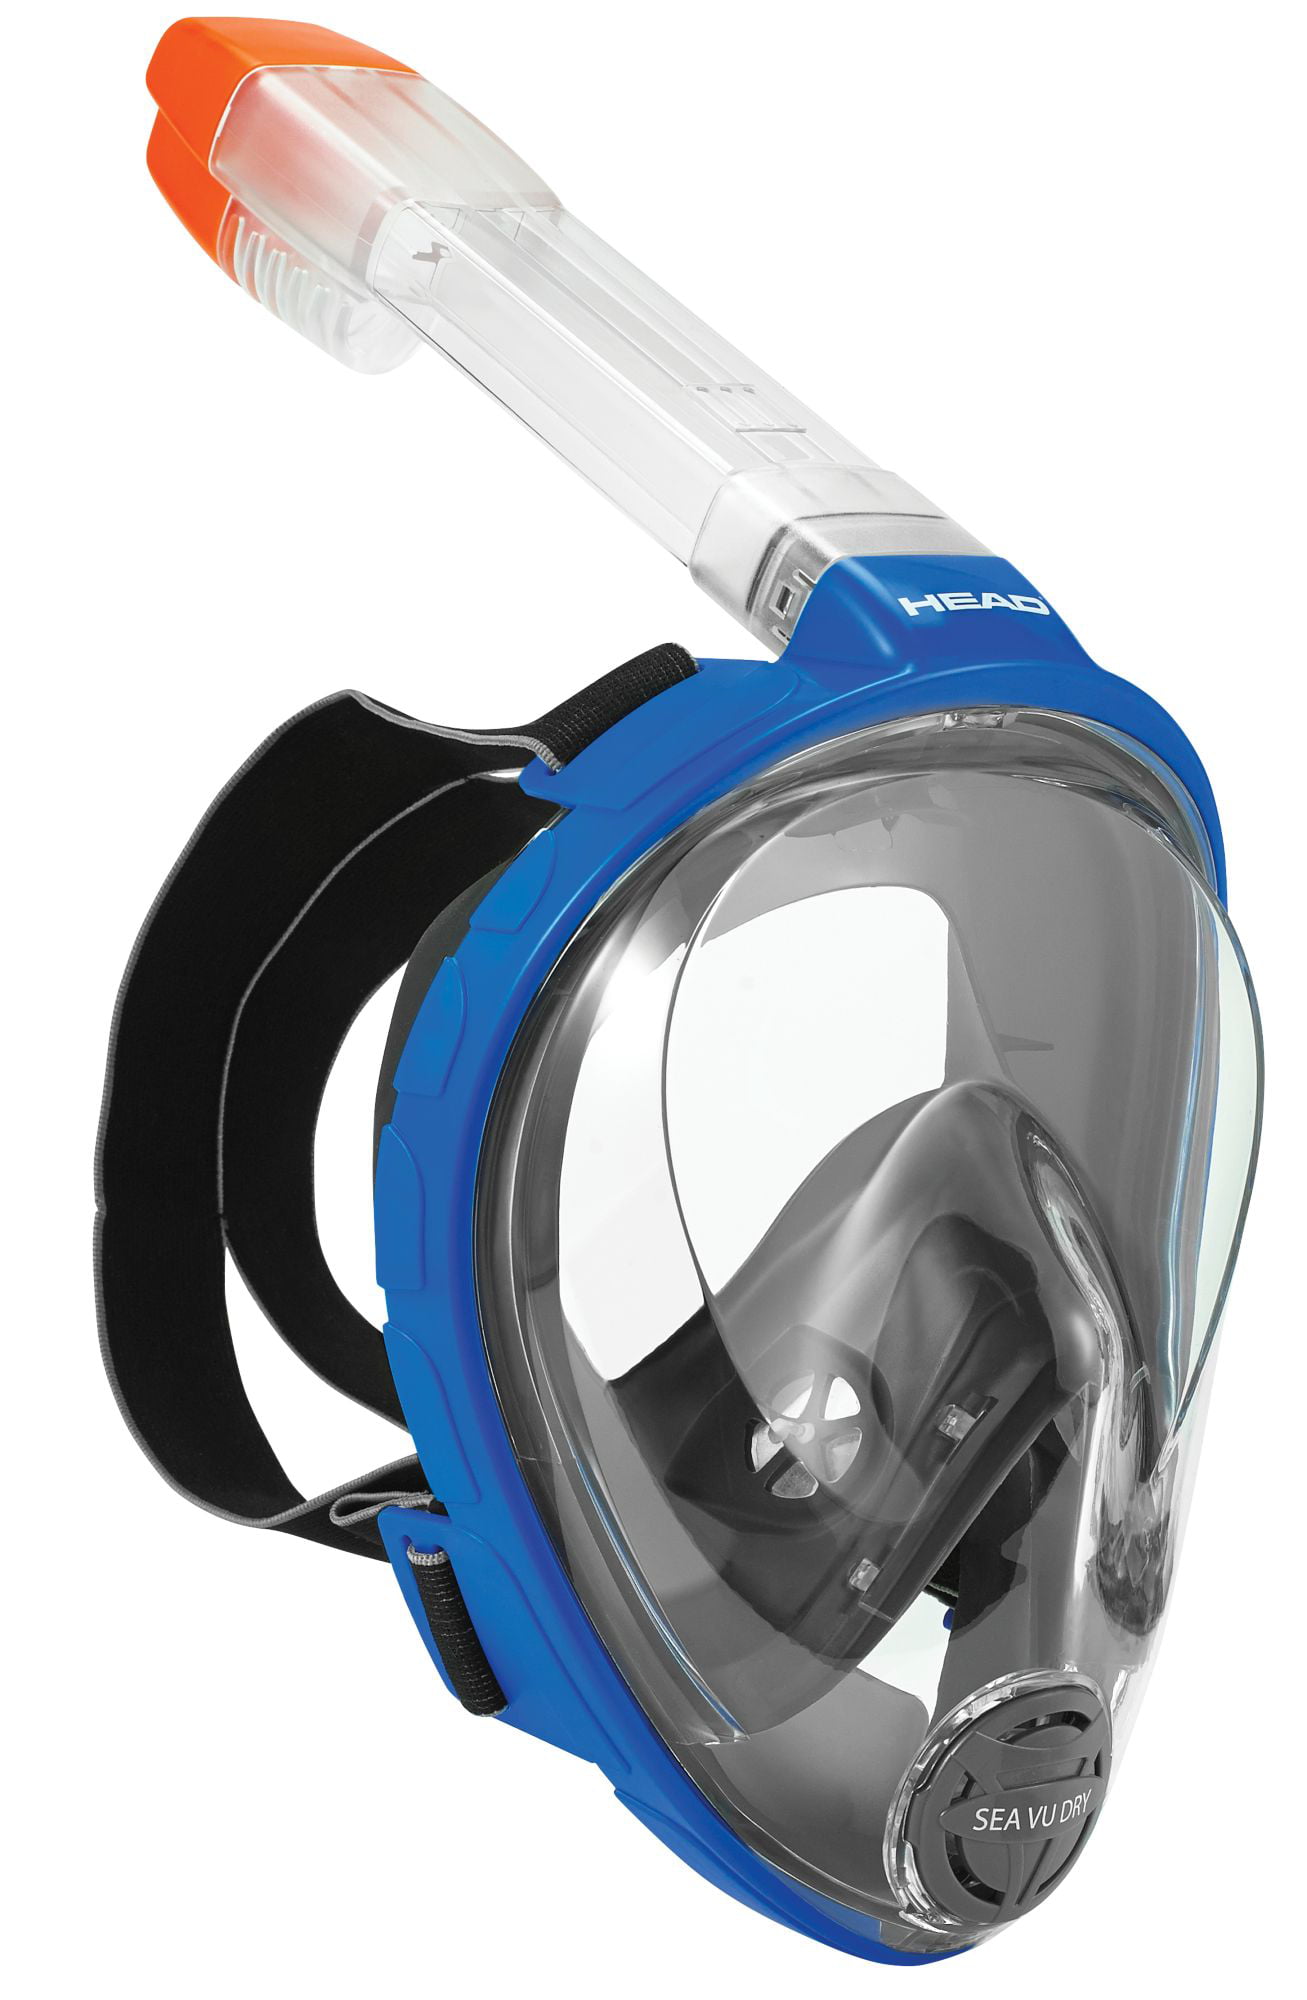 Anti-Fog Full Face Swimming Diving Mask Surface Snorkel Scuba for GoPro L/XL/S/M 